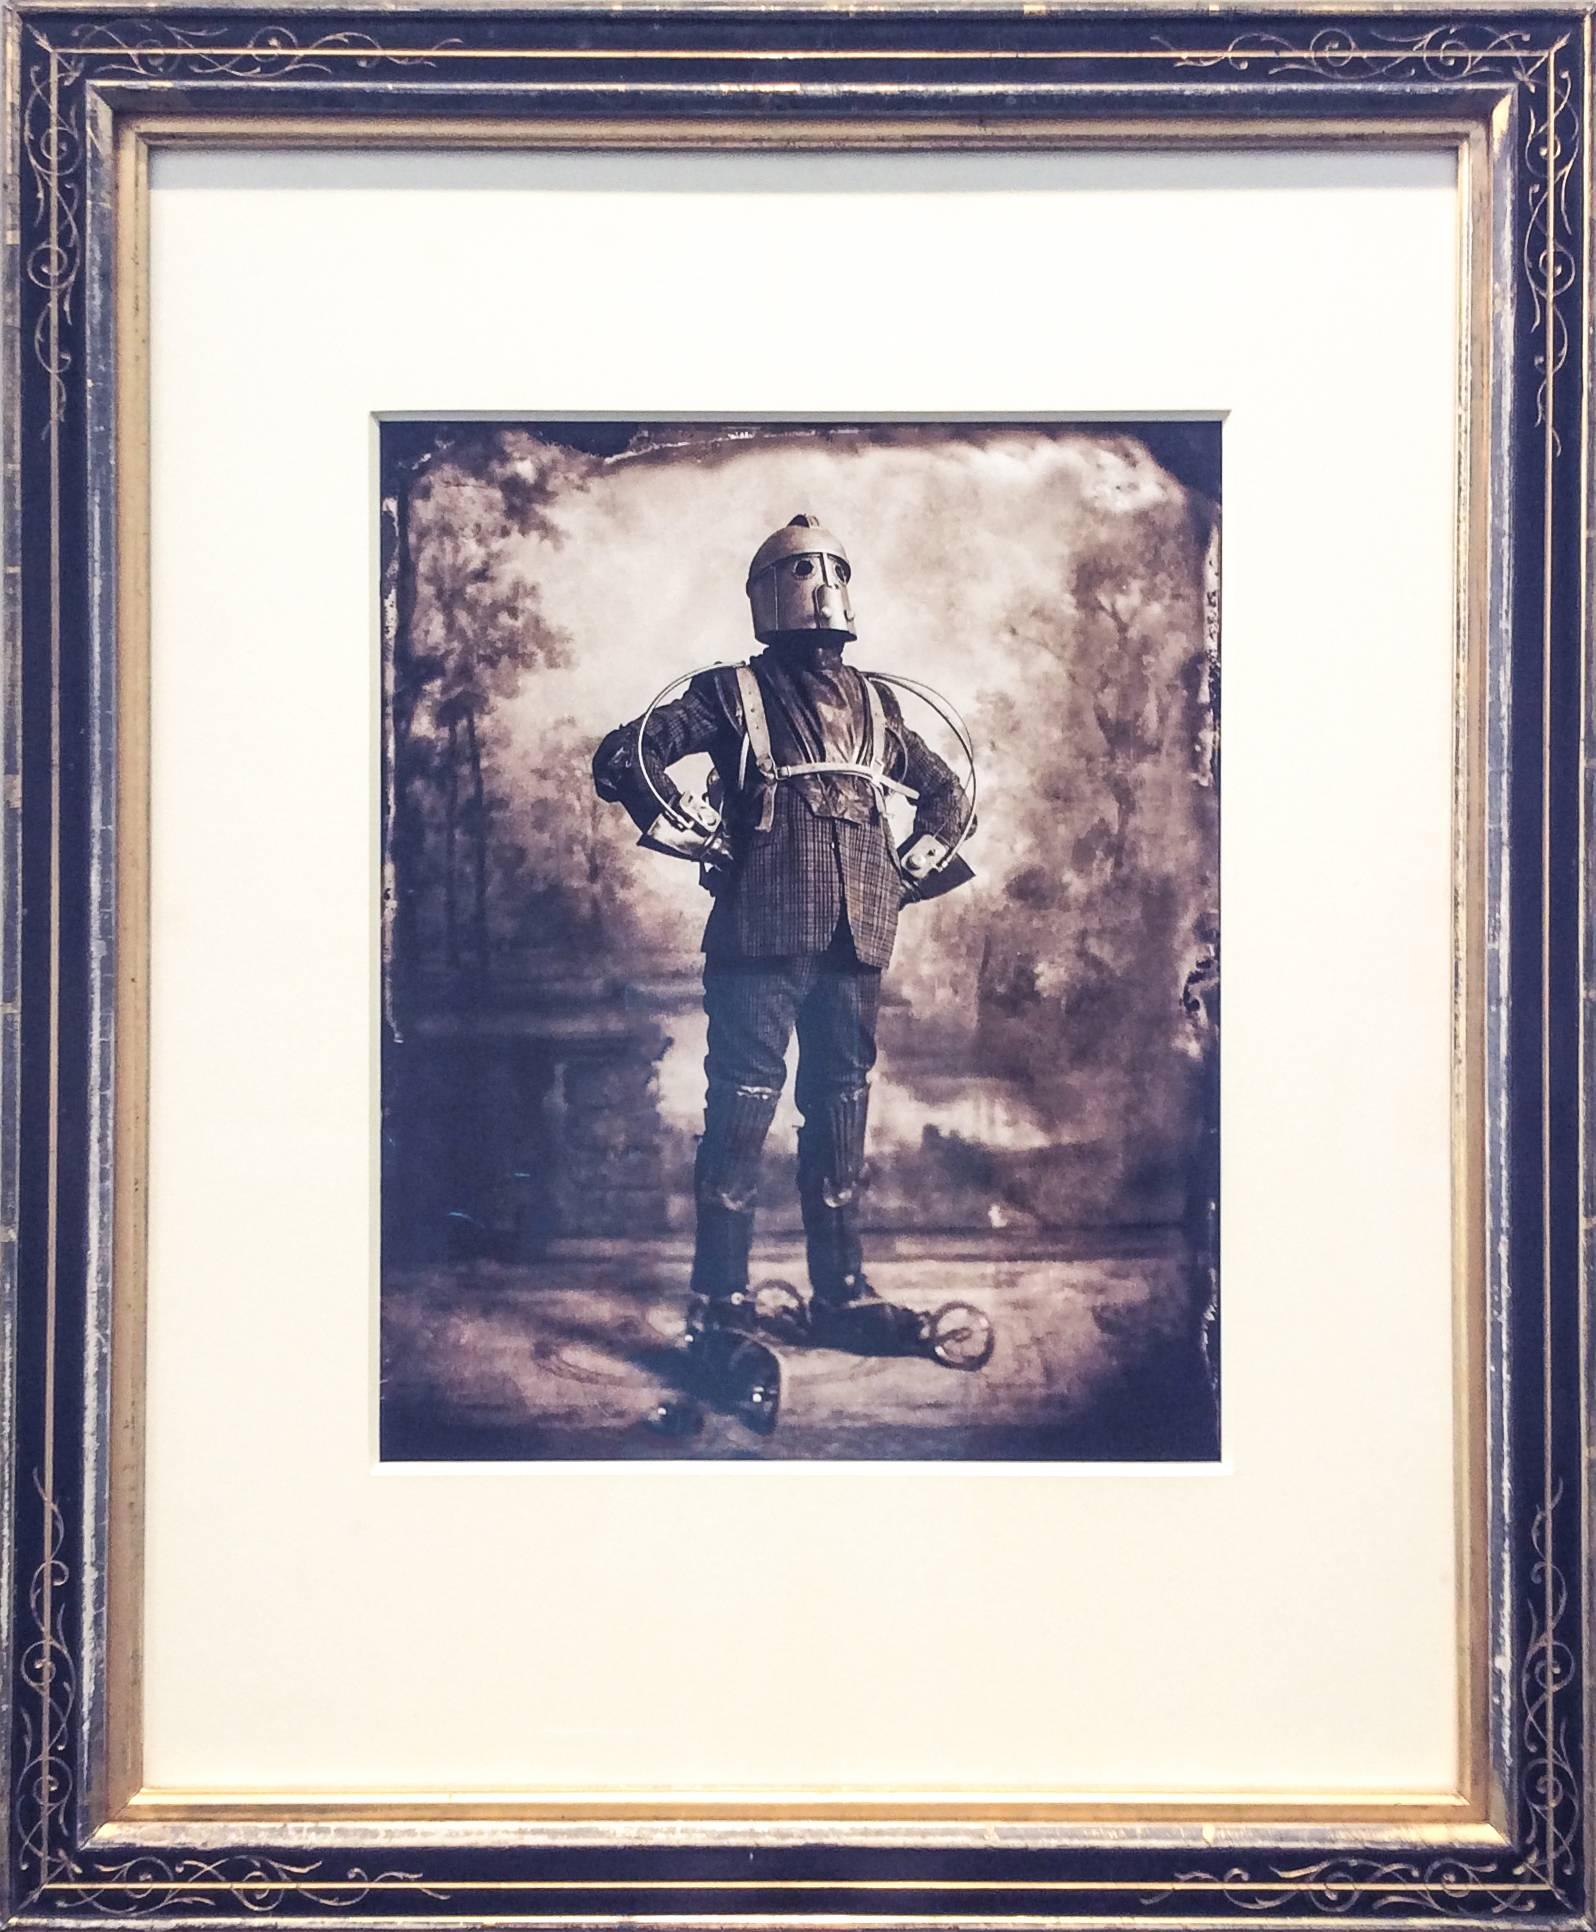 Nick Simpson Black and White Photograph - The Perambulator: Surreal, Vintage Style Sepia "Steampunk" Man in Antique Frame